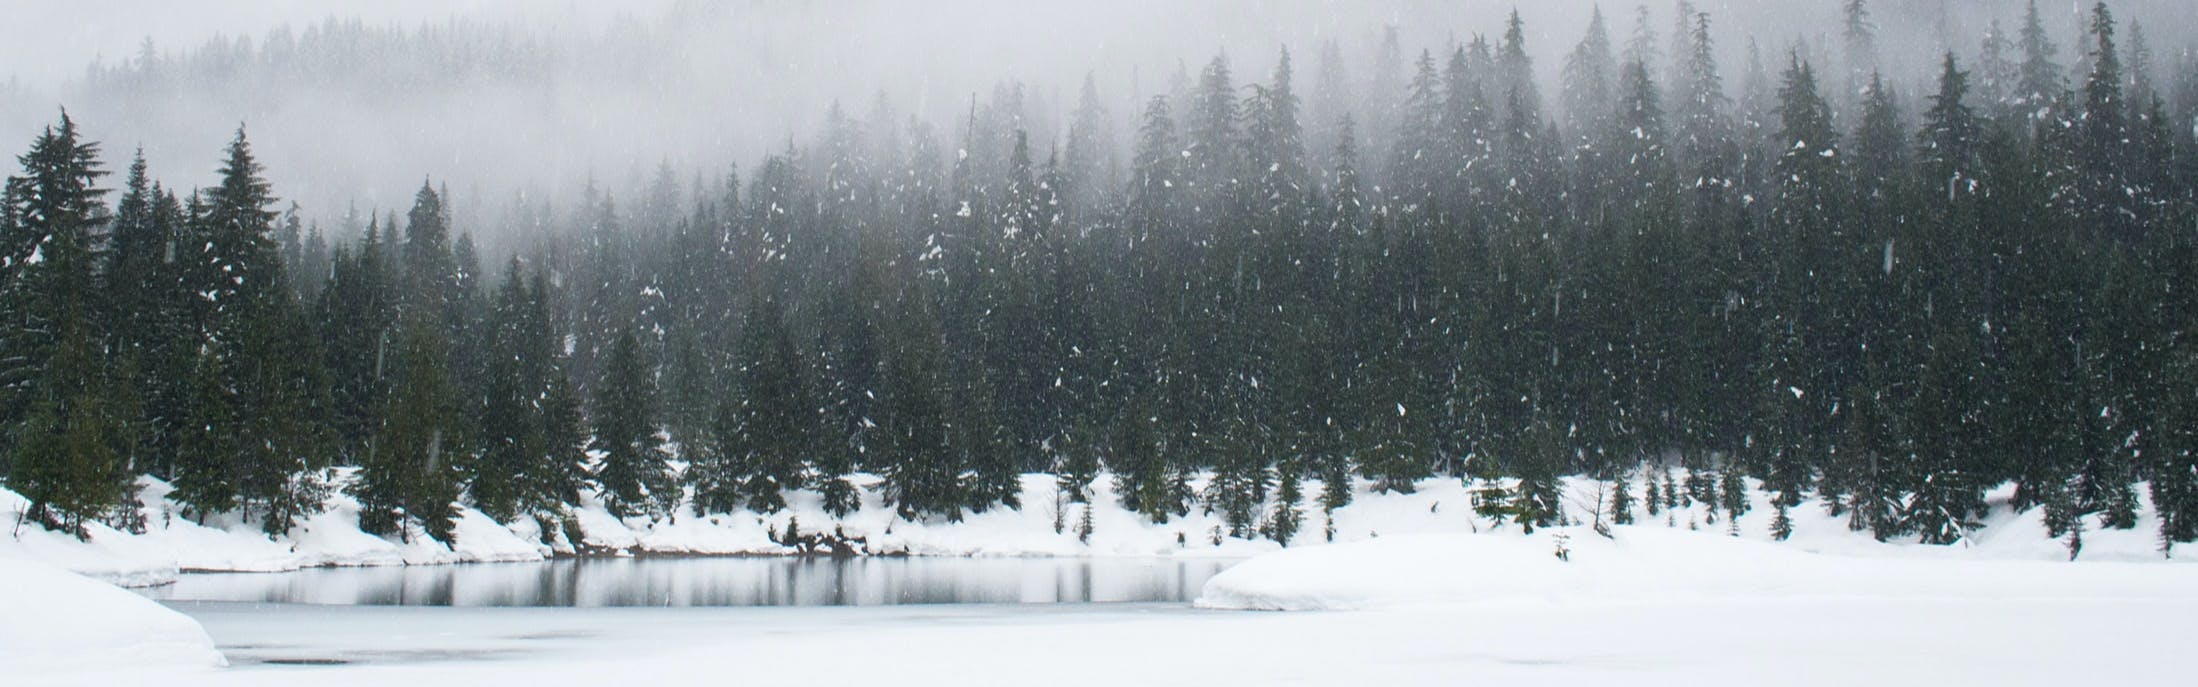 Winter blizzard over a forest and frozen lake